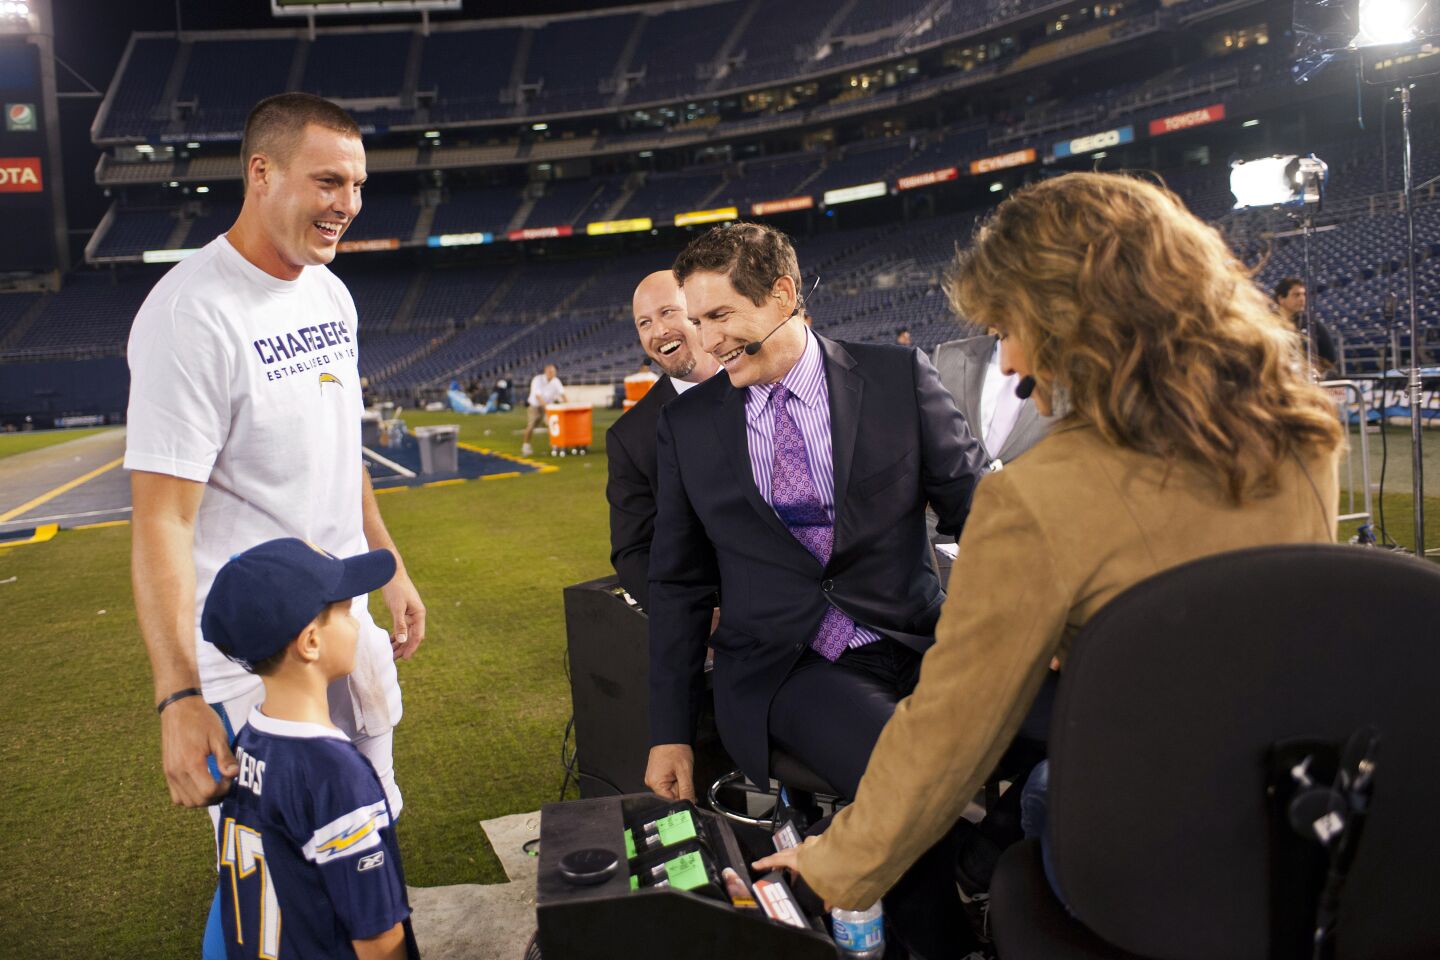 San Diego Chargers quarterback Philip Rivers and his son Gunner meet the ESPN crew of Trent Dilfer, Steve Young and Suzy Kolber after a Monday Night Football game against the Indianapolis Colts at Qualcomm Stadium. The Chargers won 19-9 on Oct. 14, 2011.